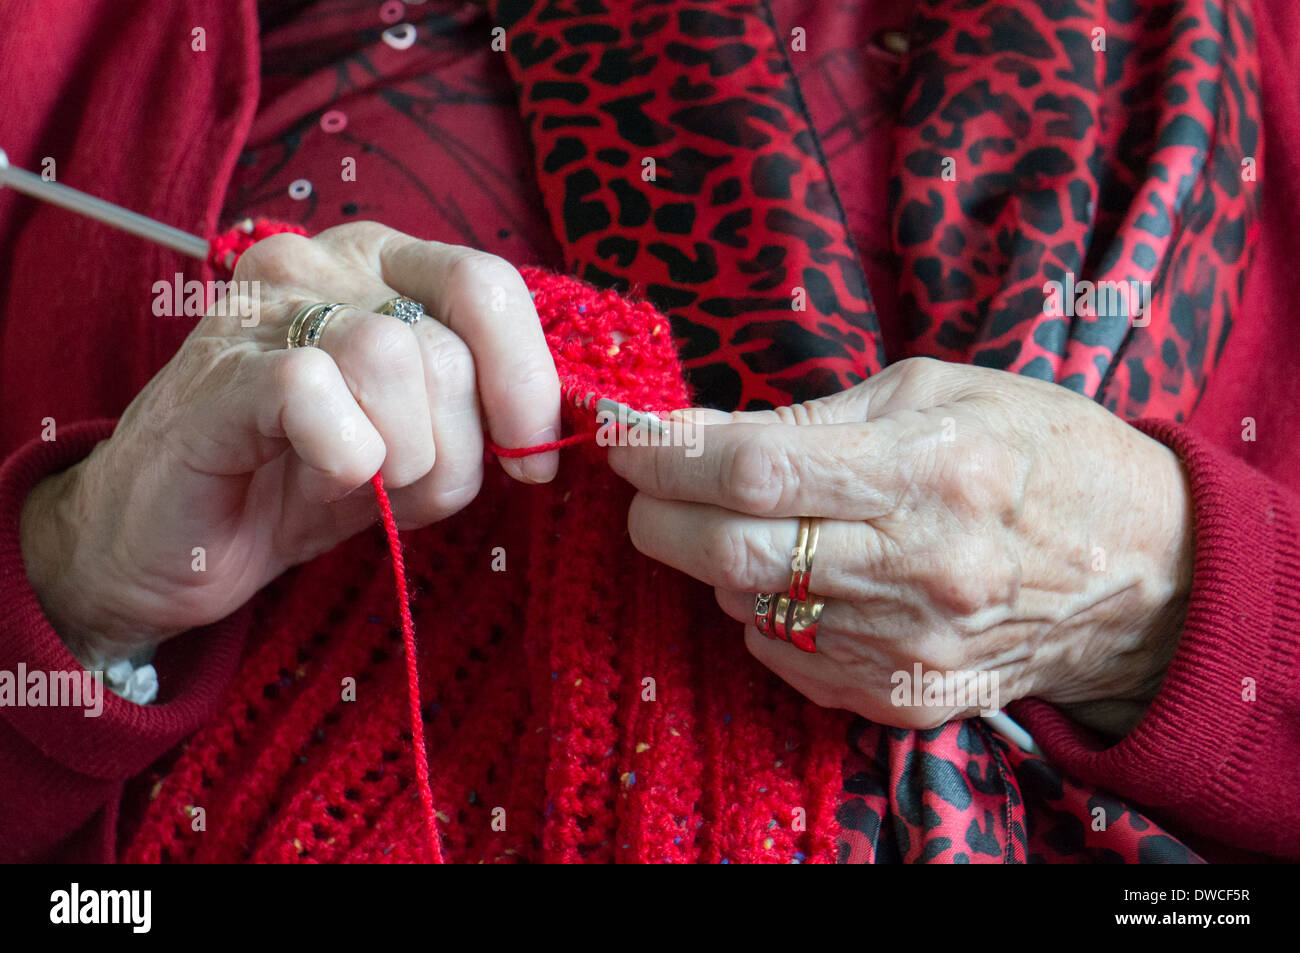 Closeup of elderly lady's hands as she is knitting Stock Photo